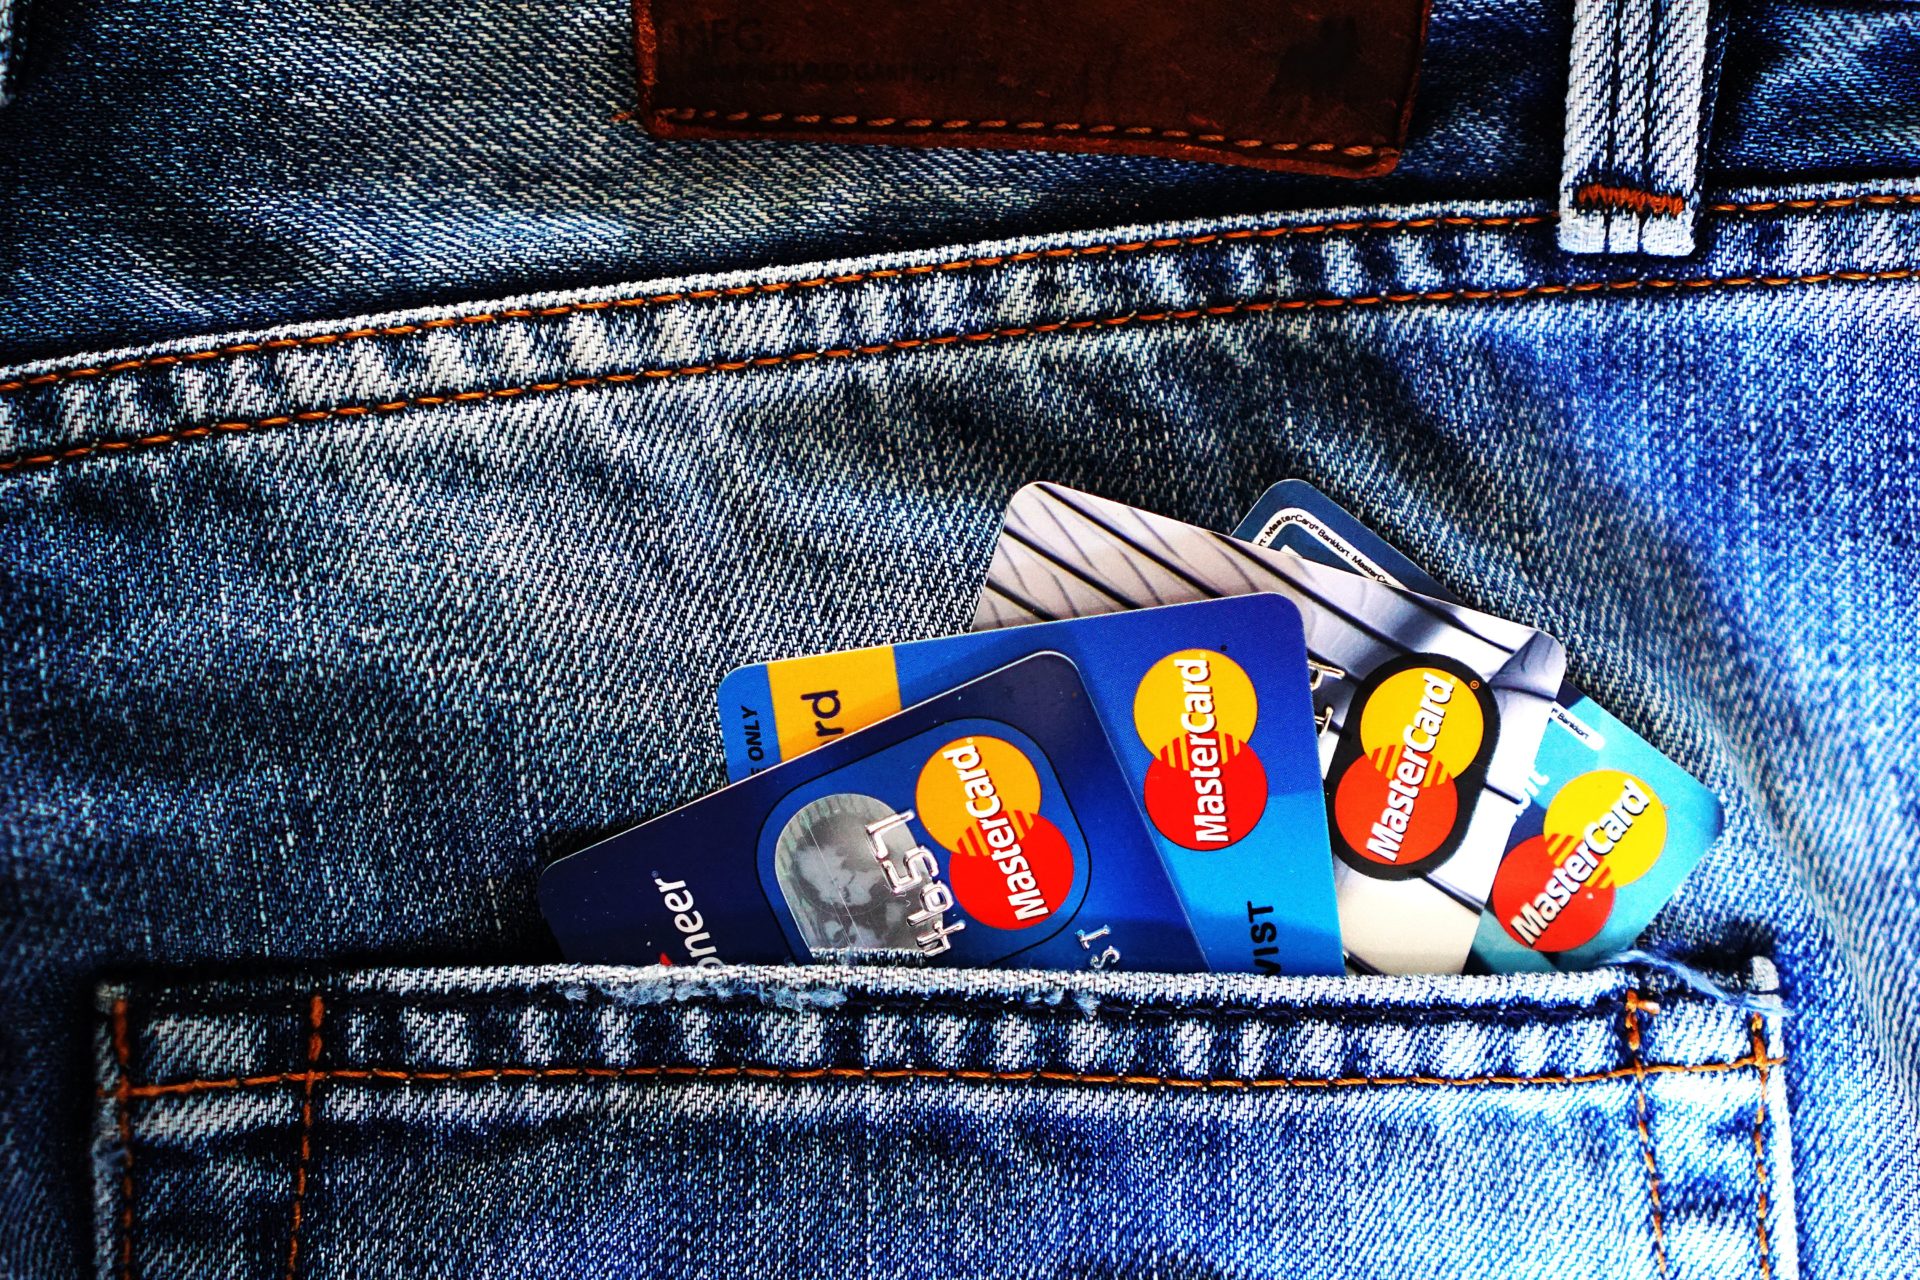 Secured vs. Unsecured Credit Cards: Making the Right Choice